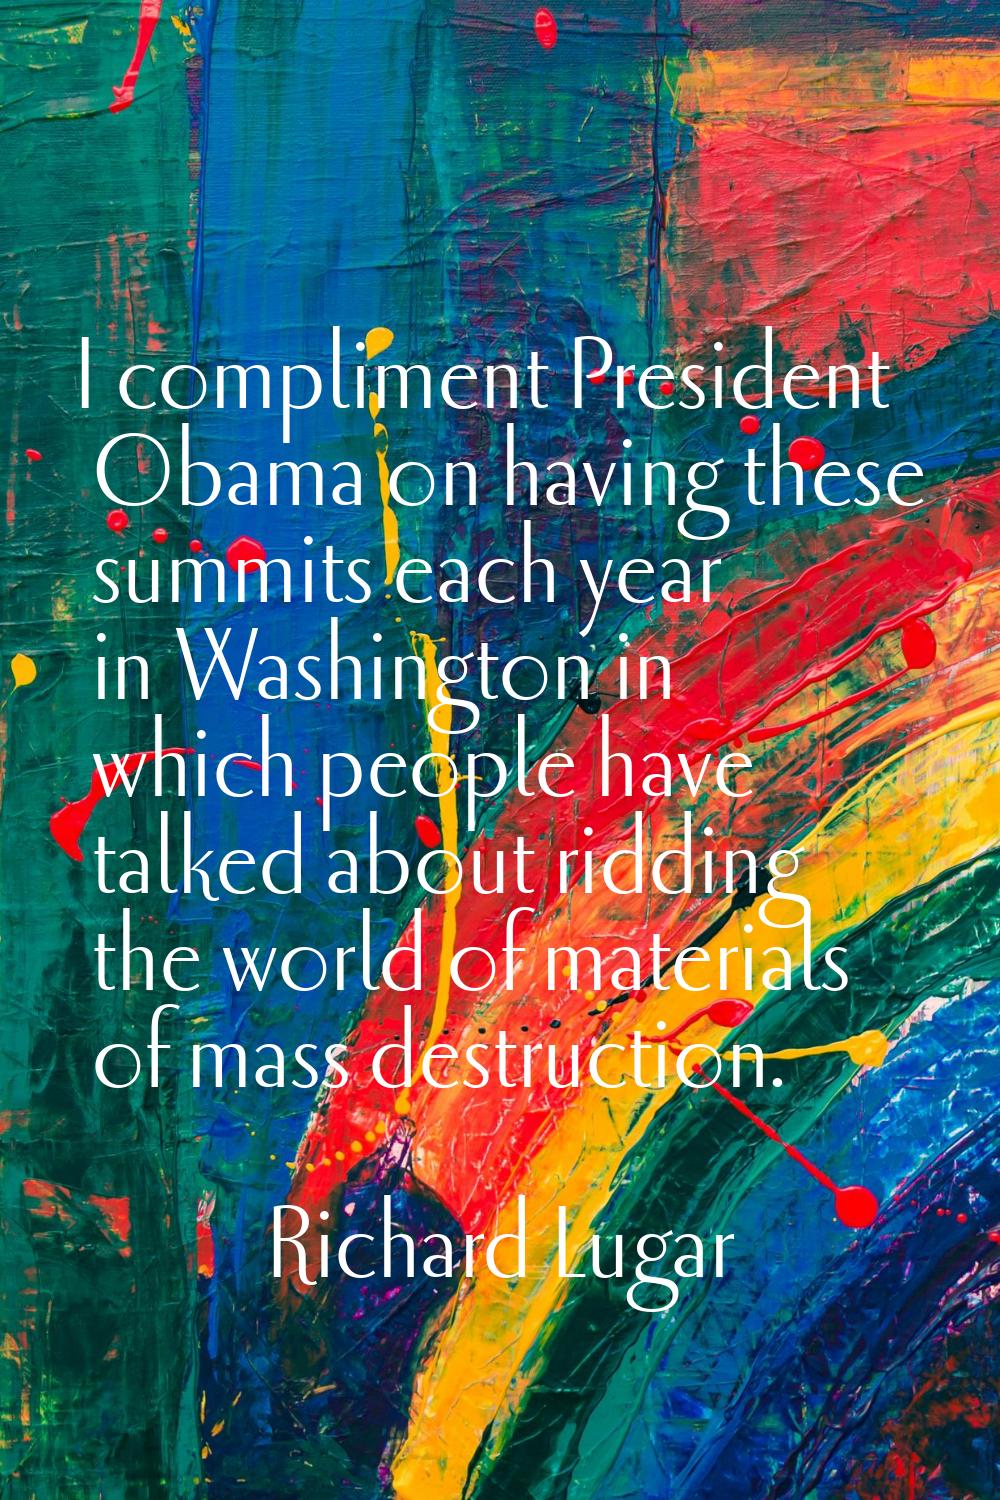 I compliment President Obama on having these summits each year in Washington in which people have t